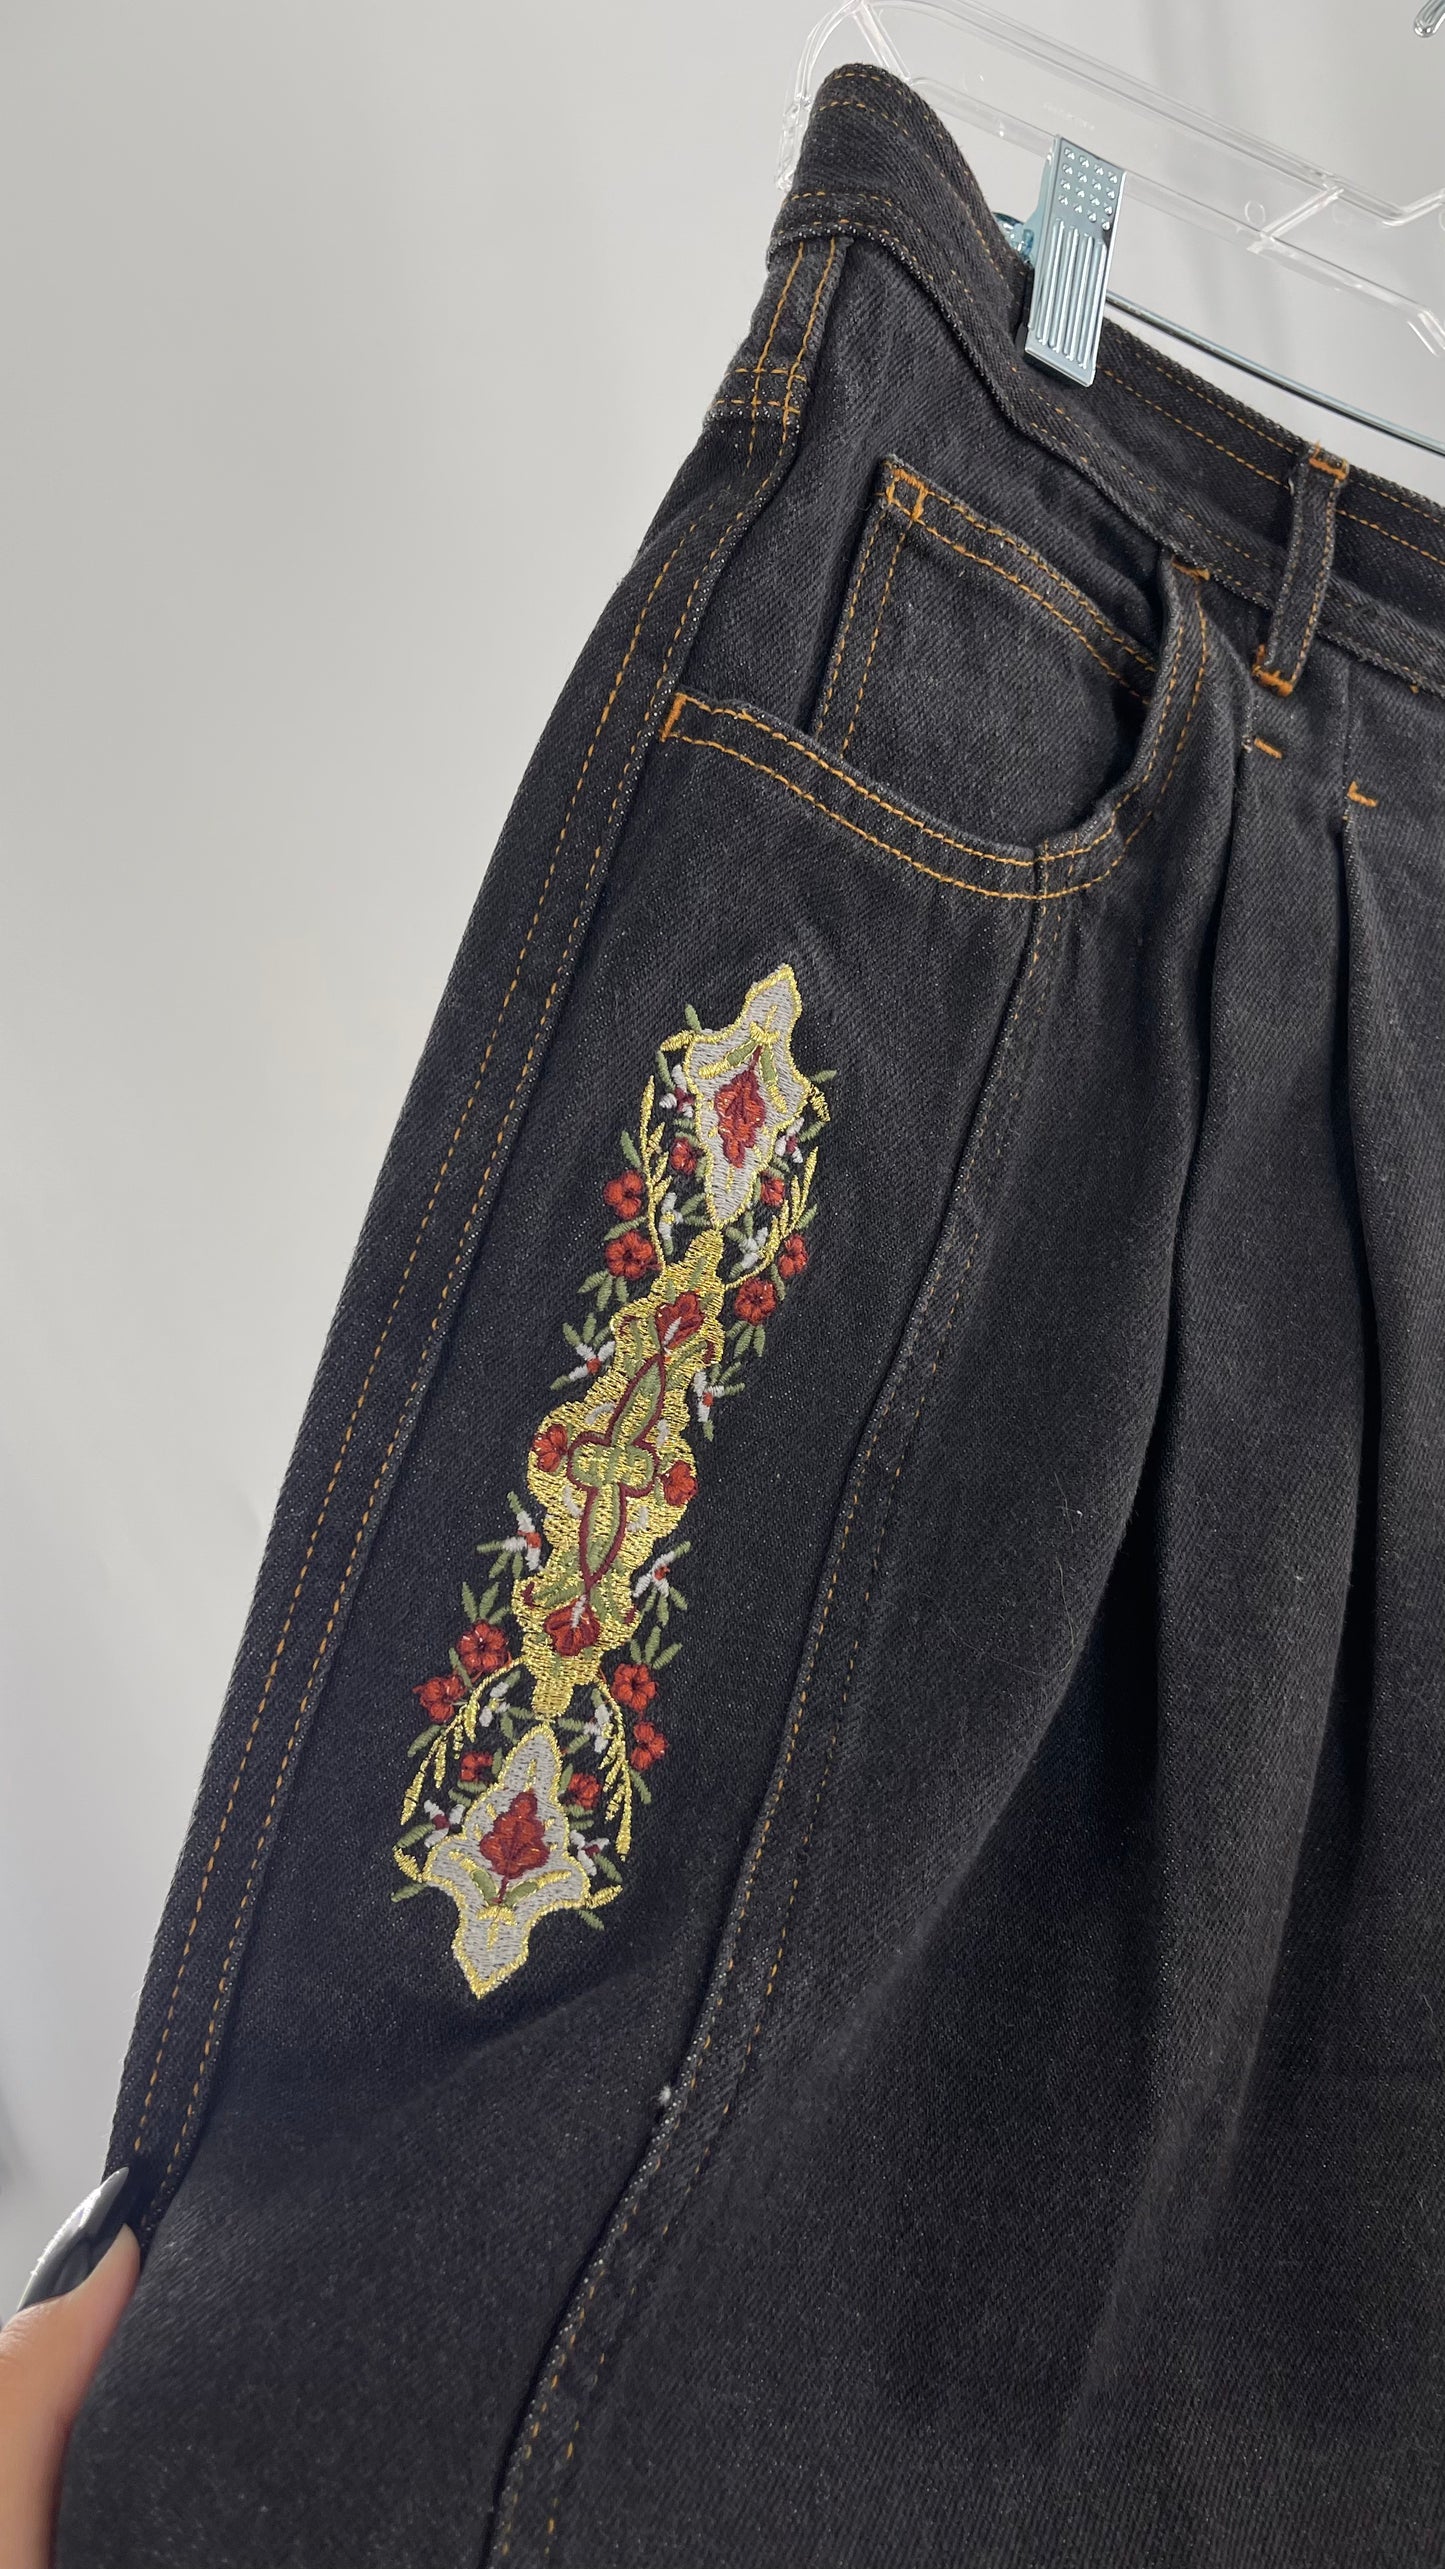 Vintage TOGETHER Basics Dark Gray 80s/90s Tapered, Pleated Waist Old School Embroidered Jeans (14)